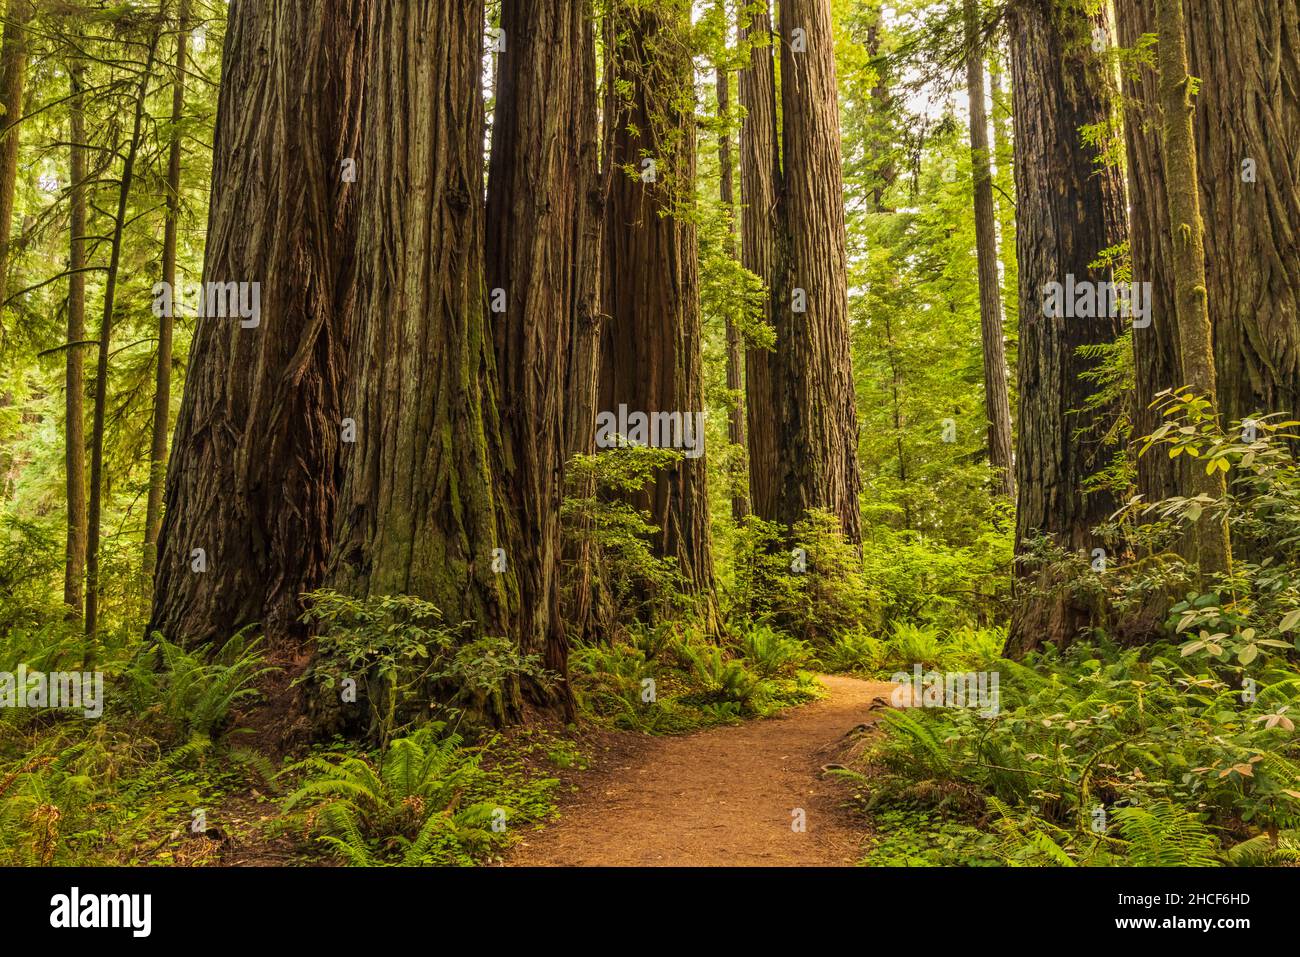 A foot trail runs between the bases of giant redwood trees the Simpson Reed Grove in Jedediah Smith Redwoods State Park, Crescent City, California. Stock Photo